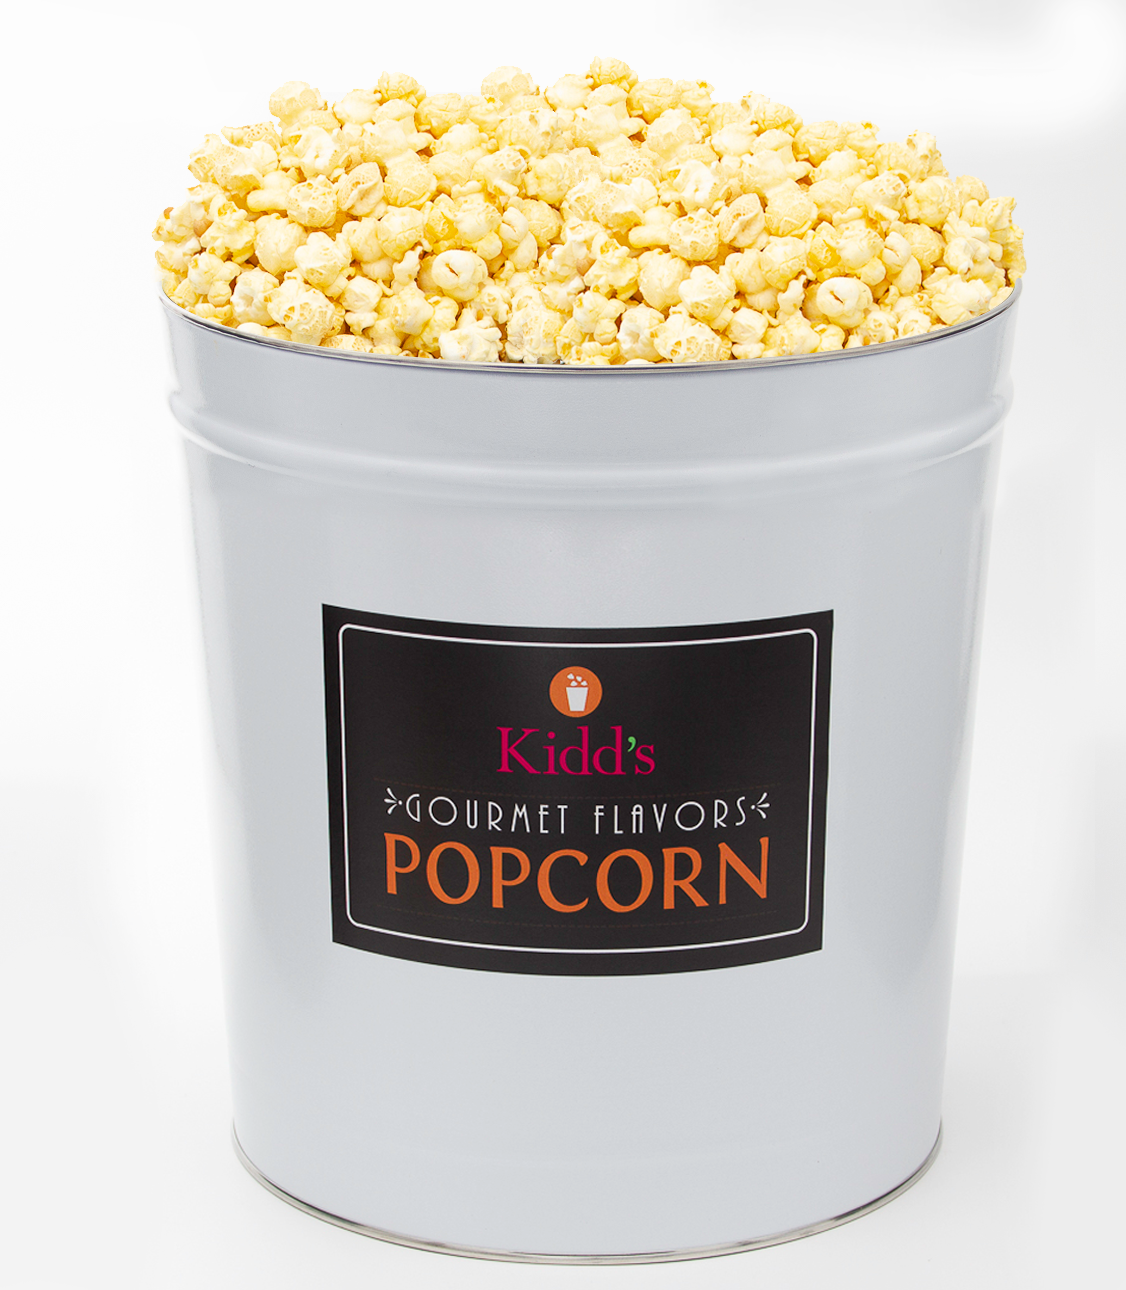 Small Batch, Made-in-House Garlic Parmesan Flavored Popcorn in a large 3.5 gallon White and Black Label Popcorn Tin Canister.